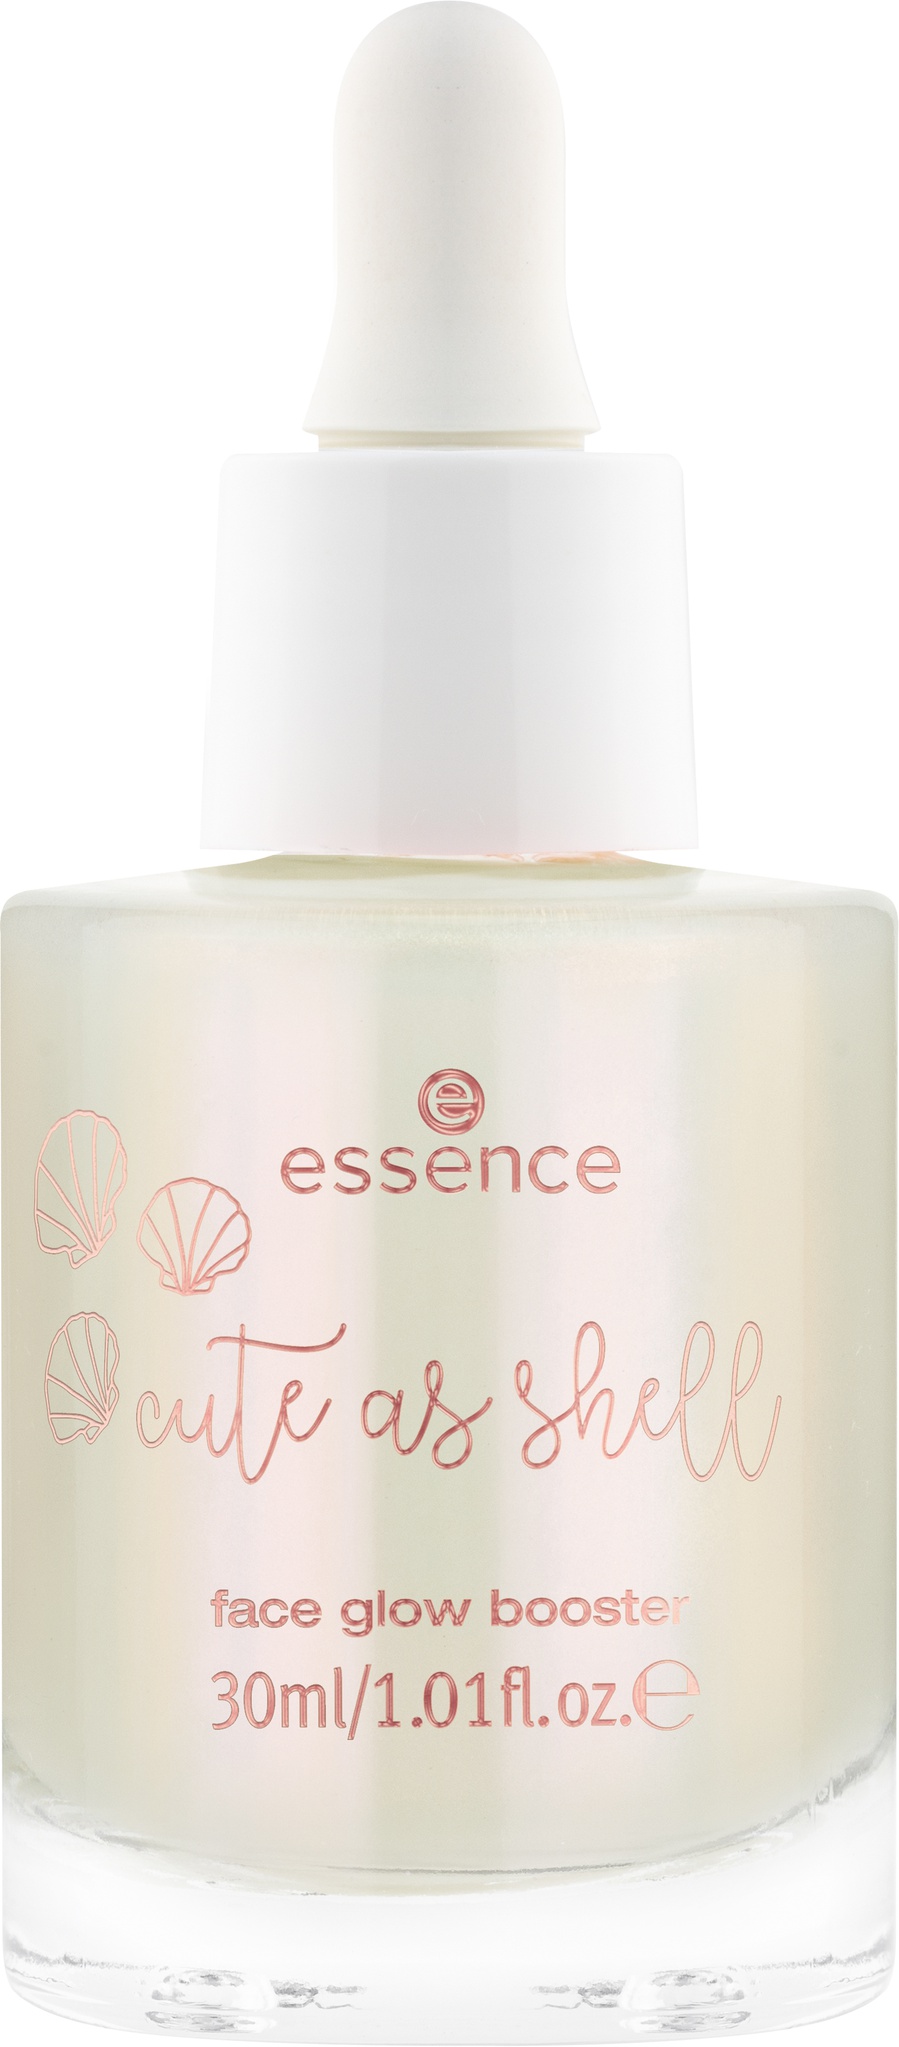 Essence Cute As Shell Face Glow Booster